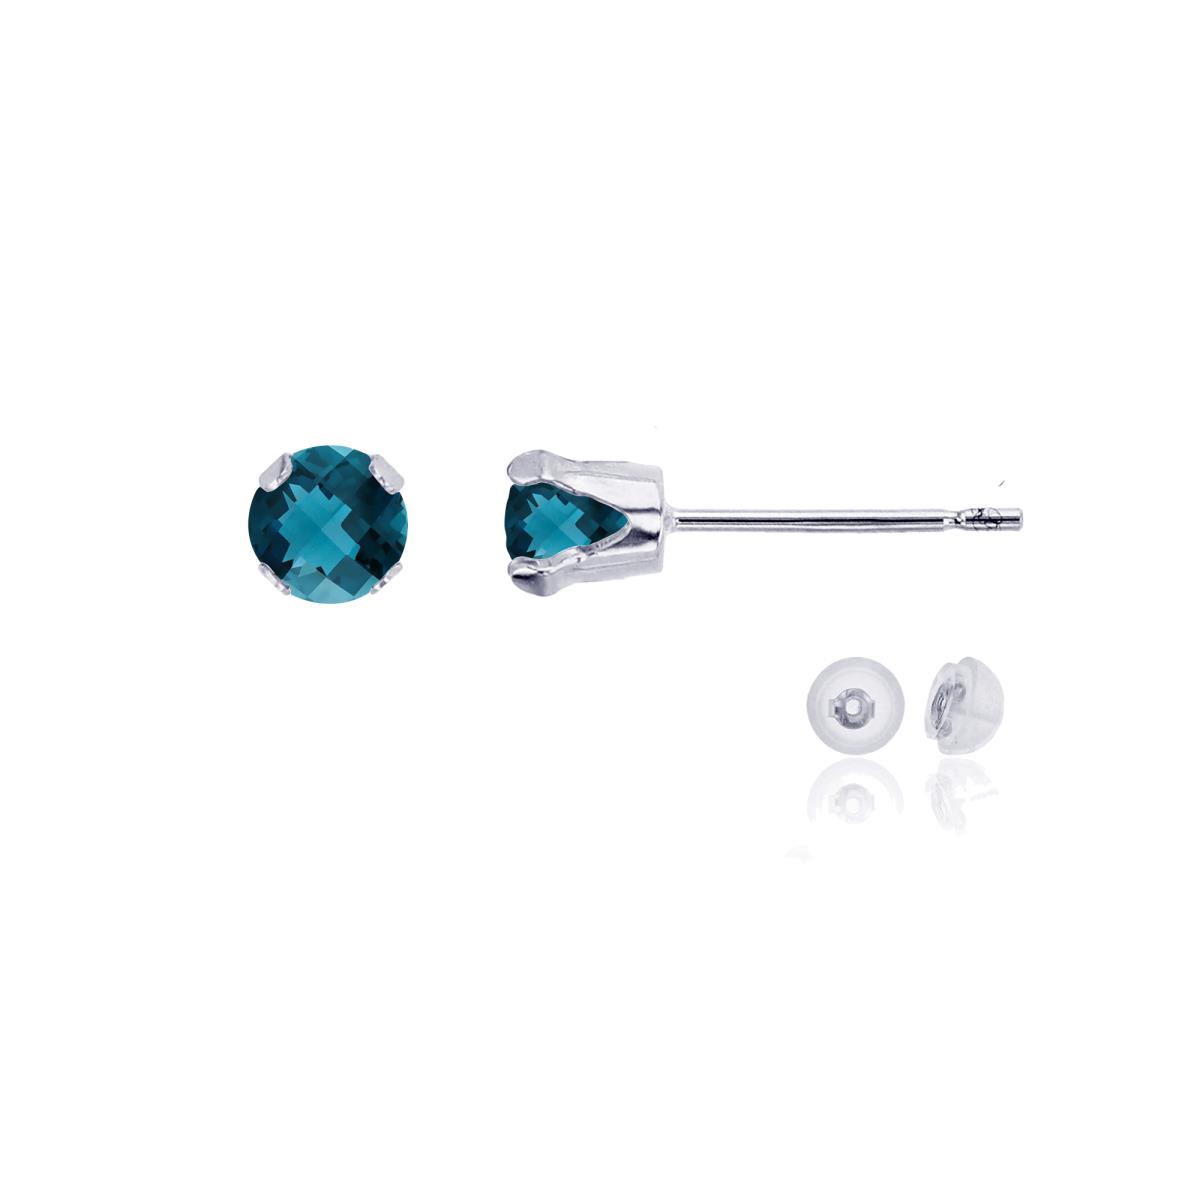 10K White Gold 4mm Round London Blue Topaz Stud Earring with Silicone Back